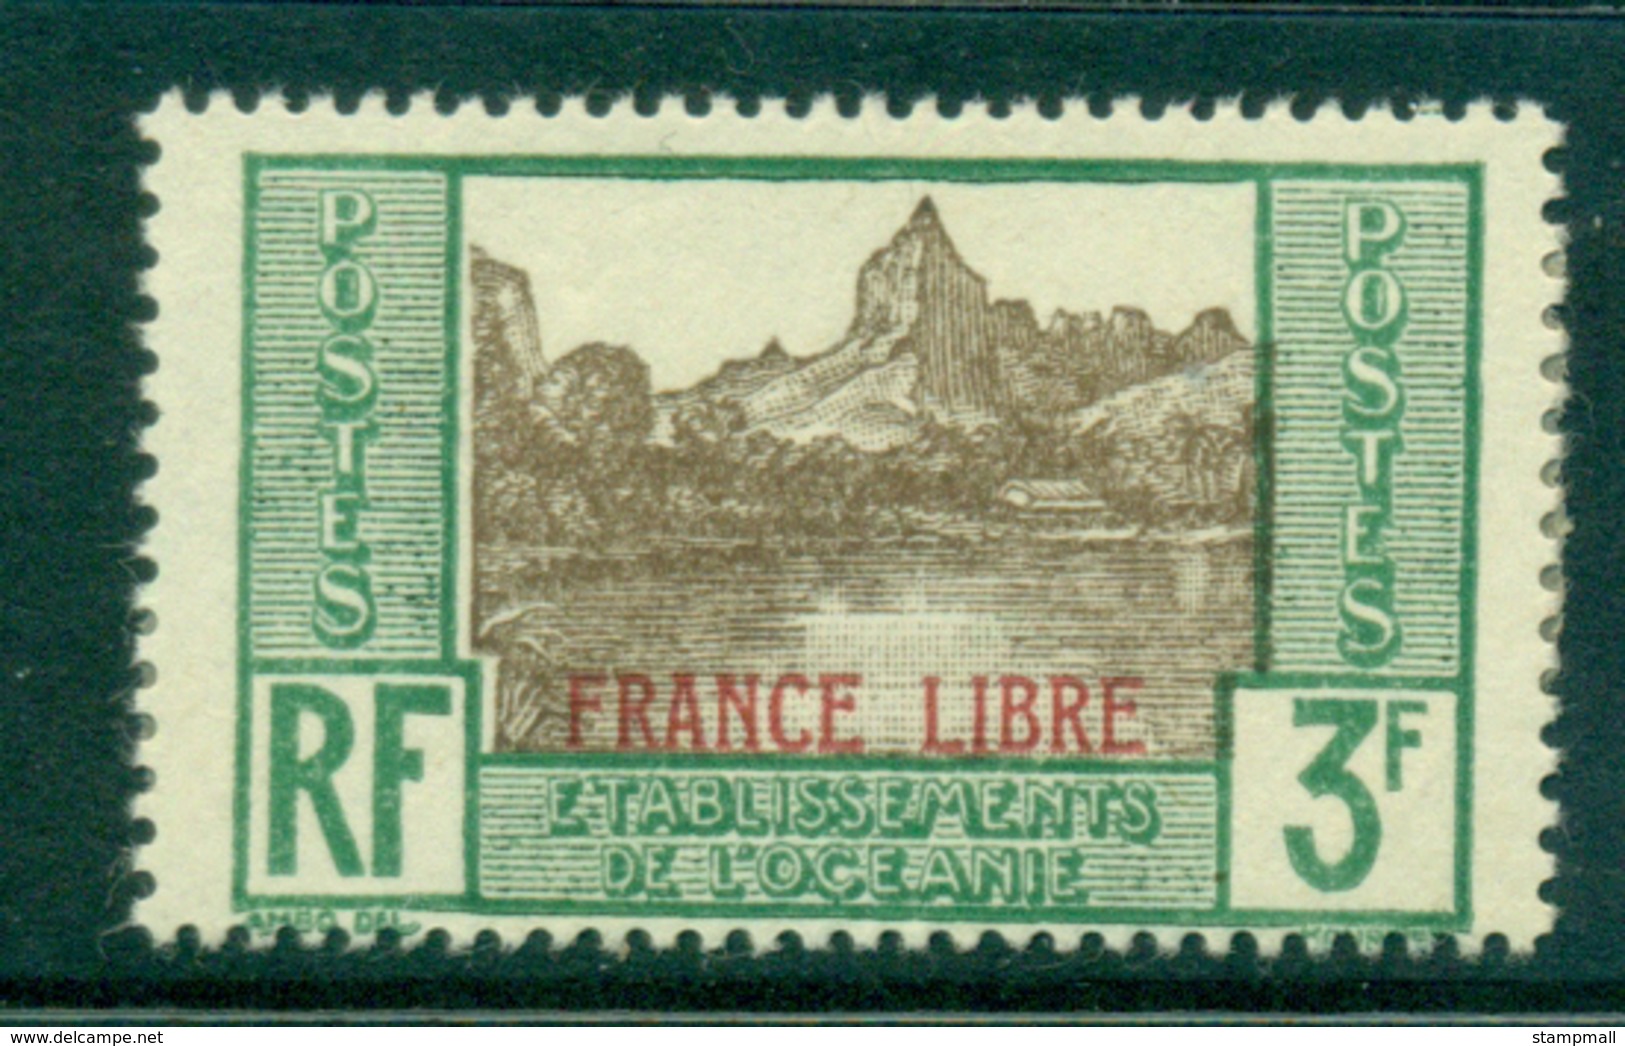 French Polynesia 1941 3fr Papeotai Bay Opt France Libre MLH Lot38418 - Used Stamps